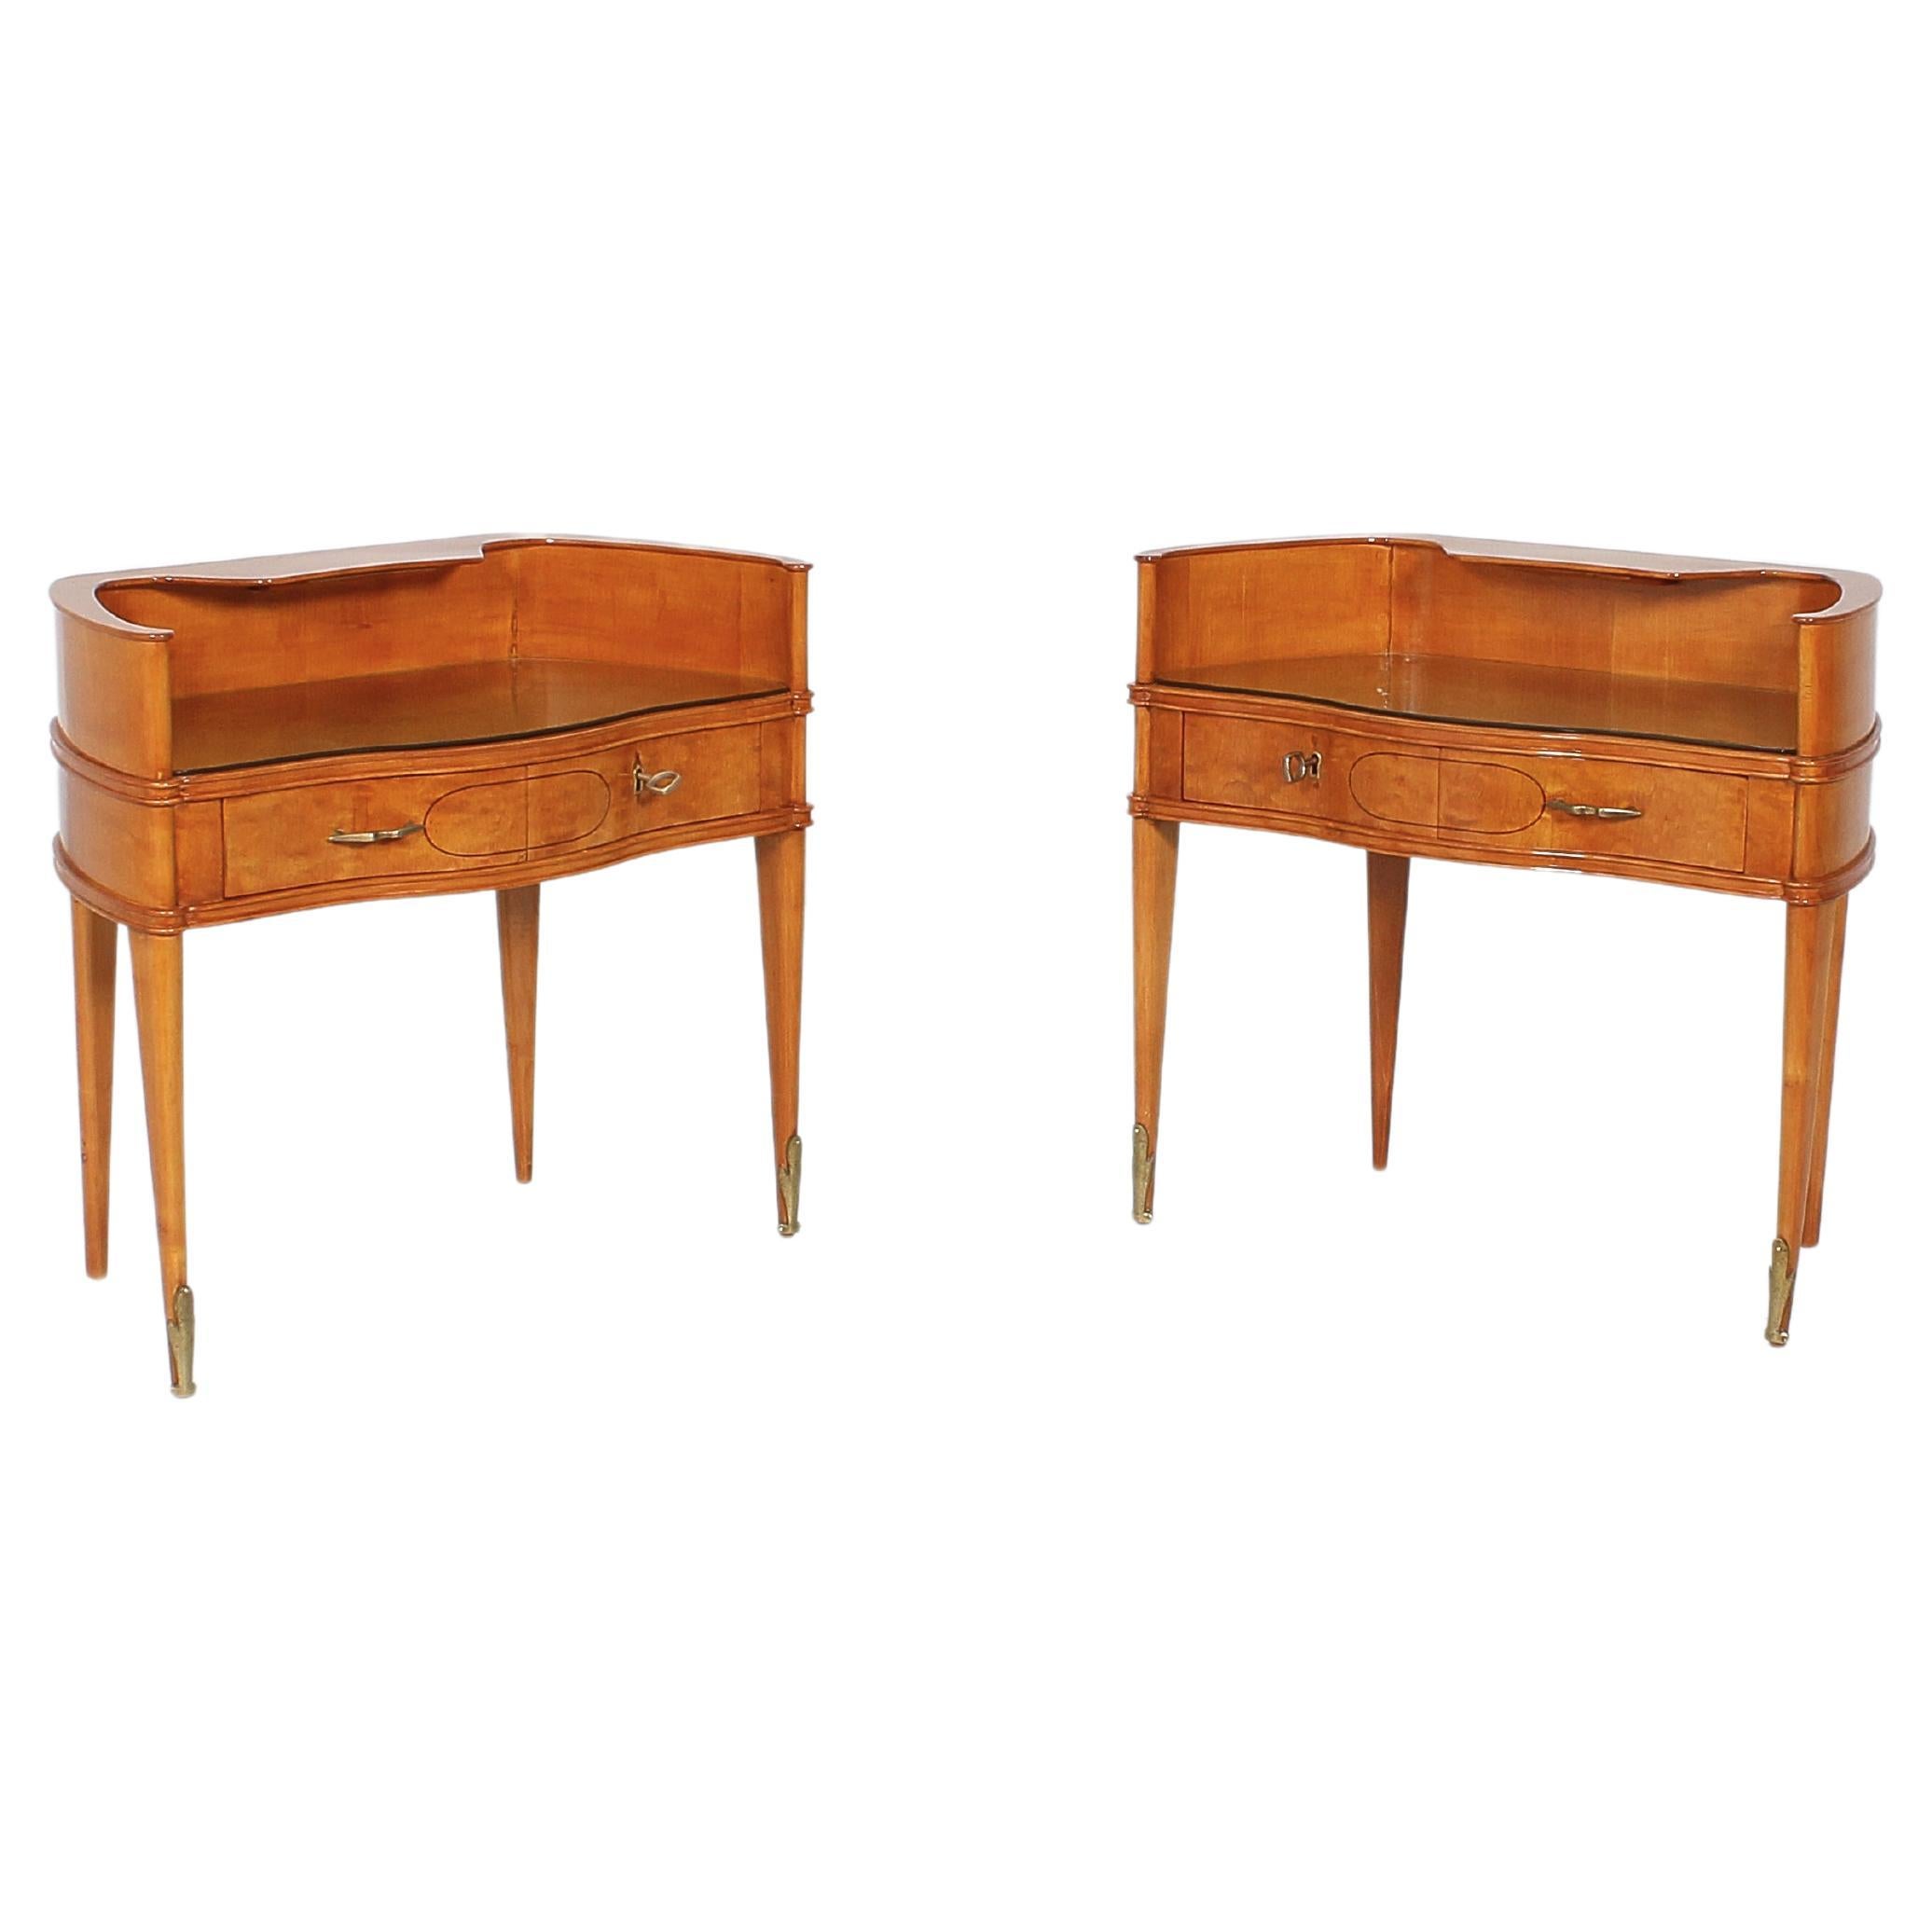 Pair of beautiful rounded bedside tables in light wood with front drawers and glass top, restored. Attributed to Paolo Buffa. Cantù Art Furniture, 1950s
Wear consistent with age and use.